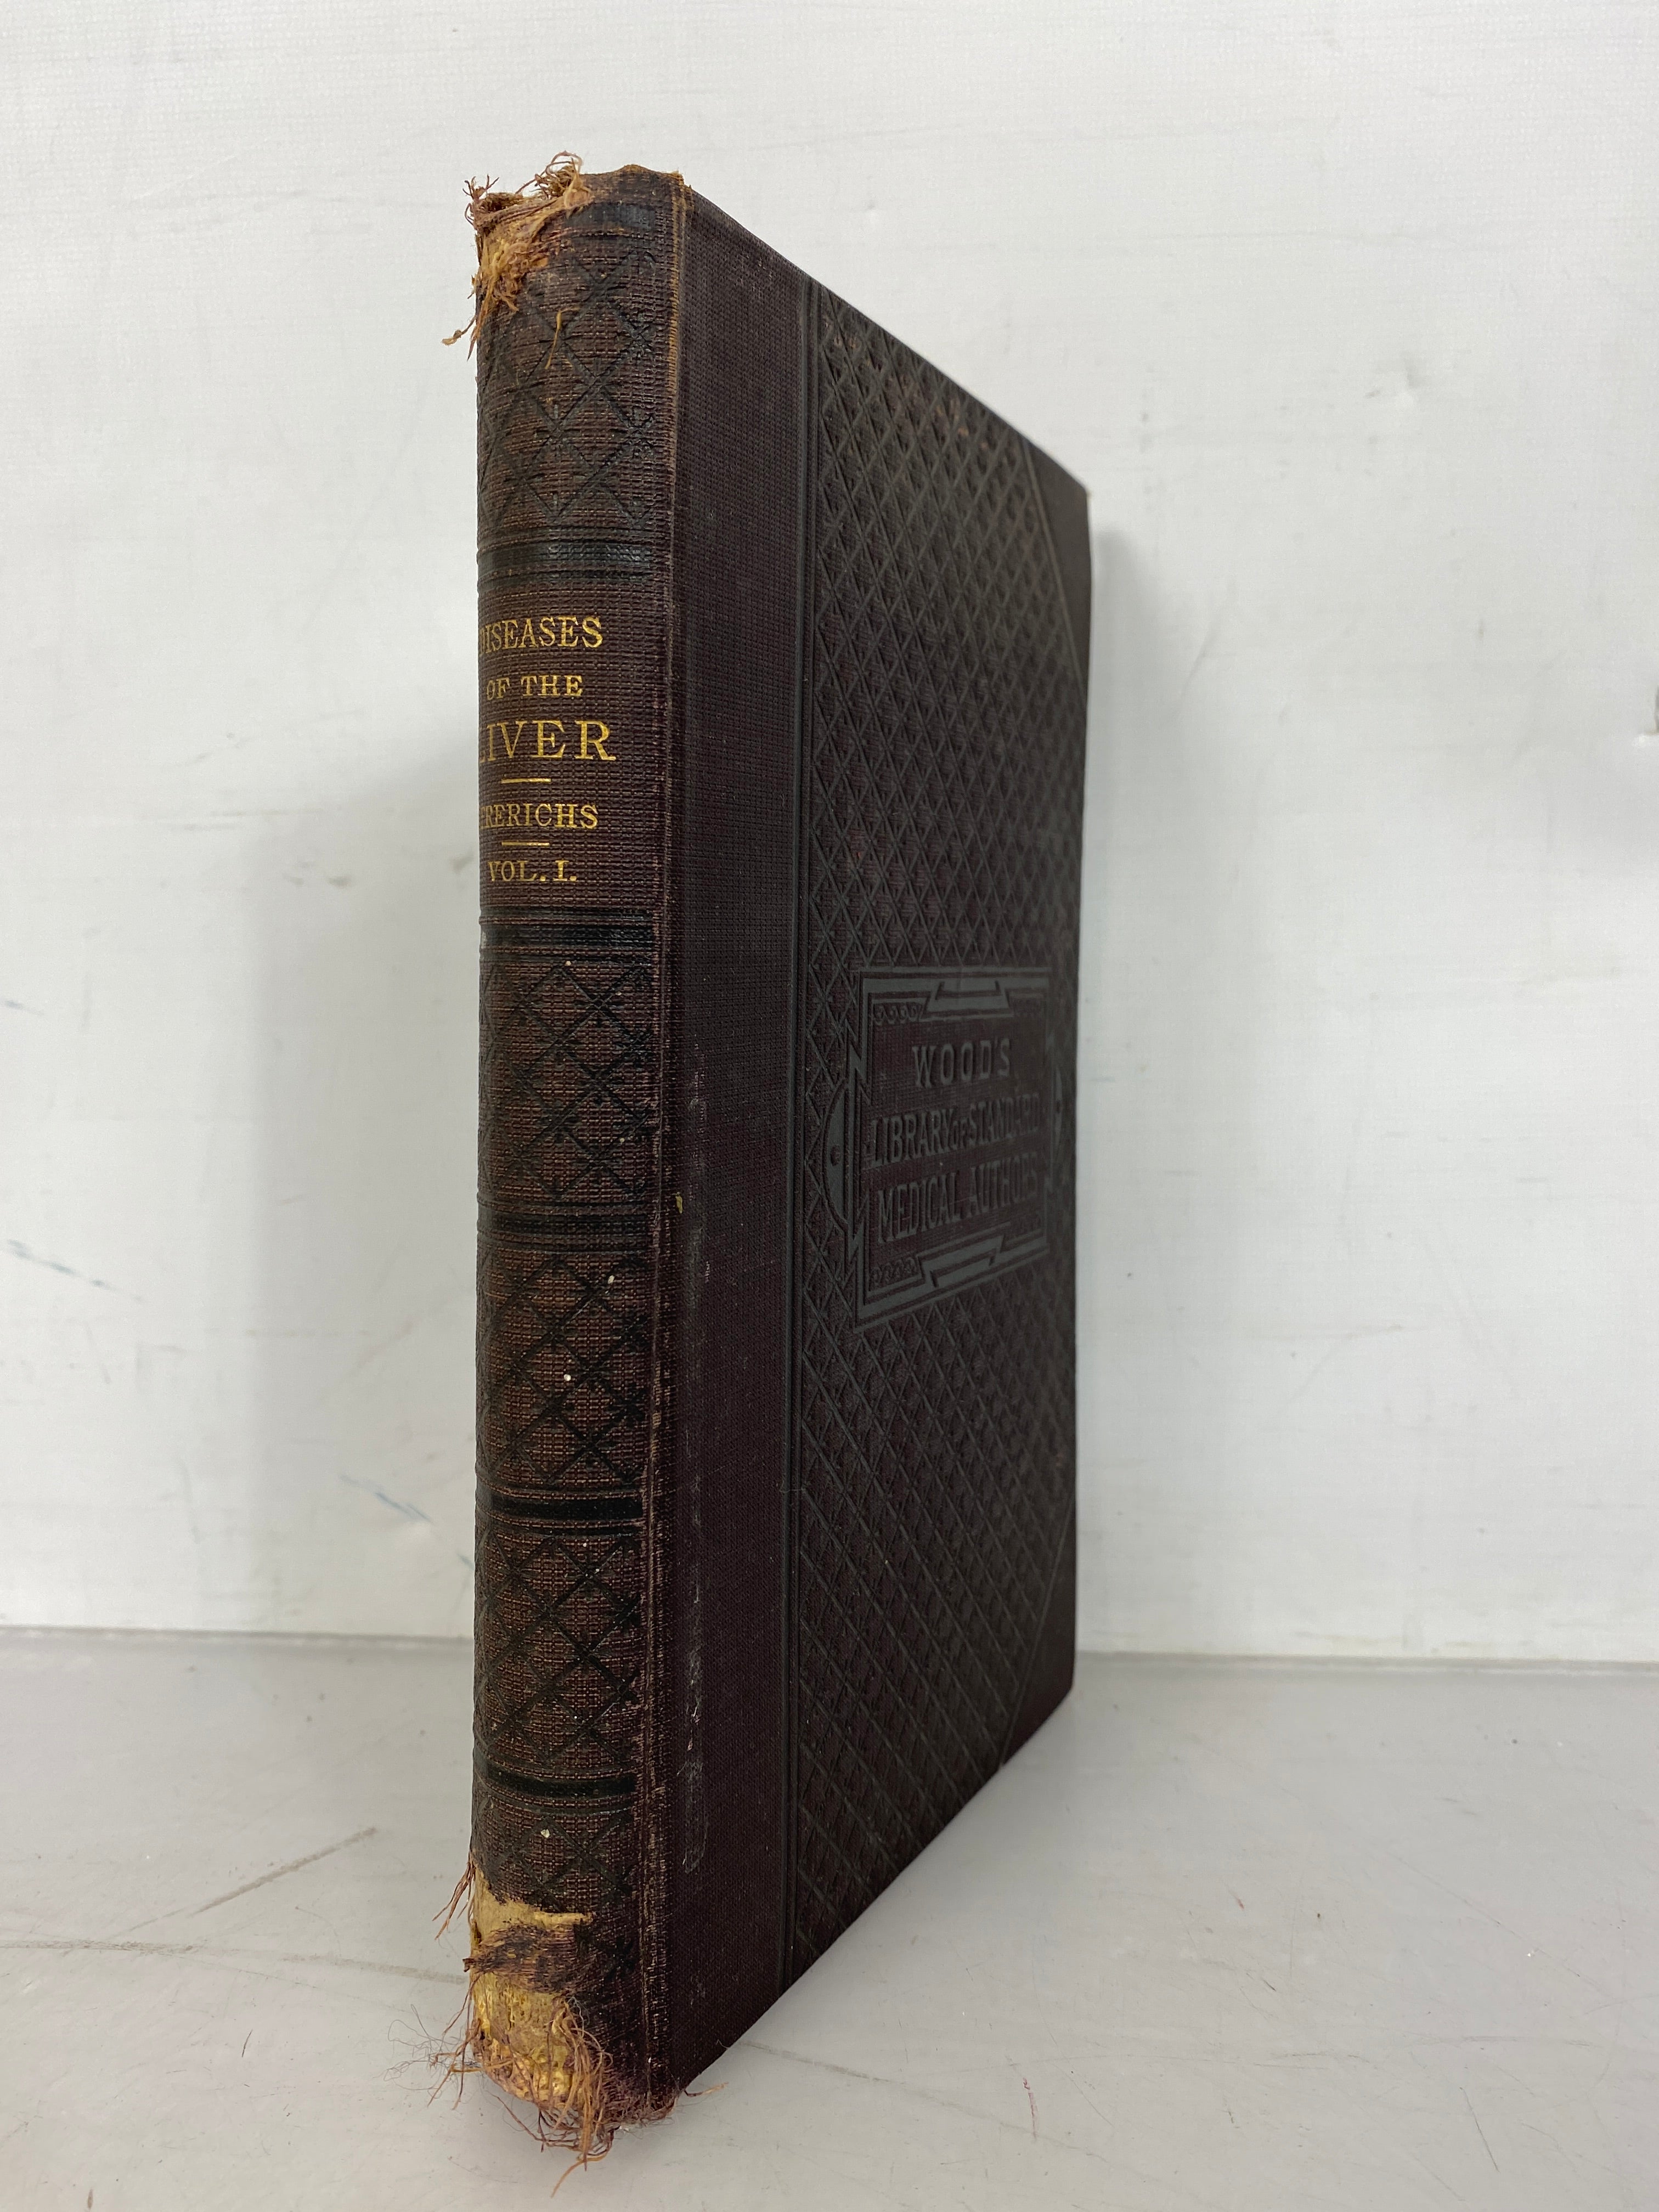 Wood's Medical Library Diseases of the Liver 3 Vol Set by Frerichs 1879 HC